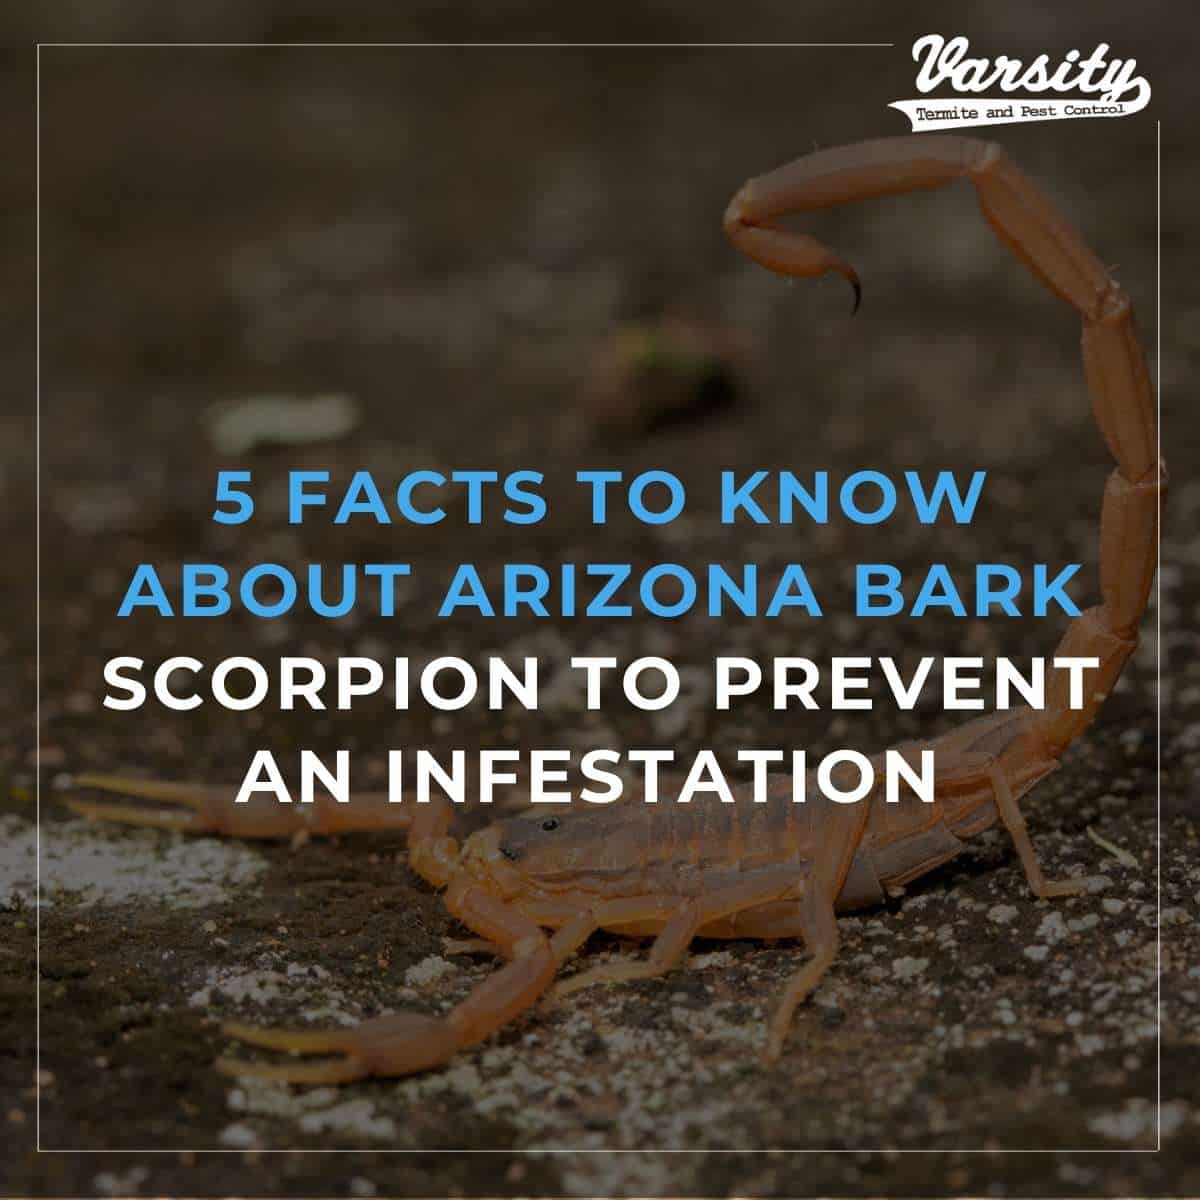 5 Facts To Know About Arizona Bark Scorpion To Prevent An Infestation